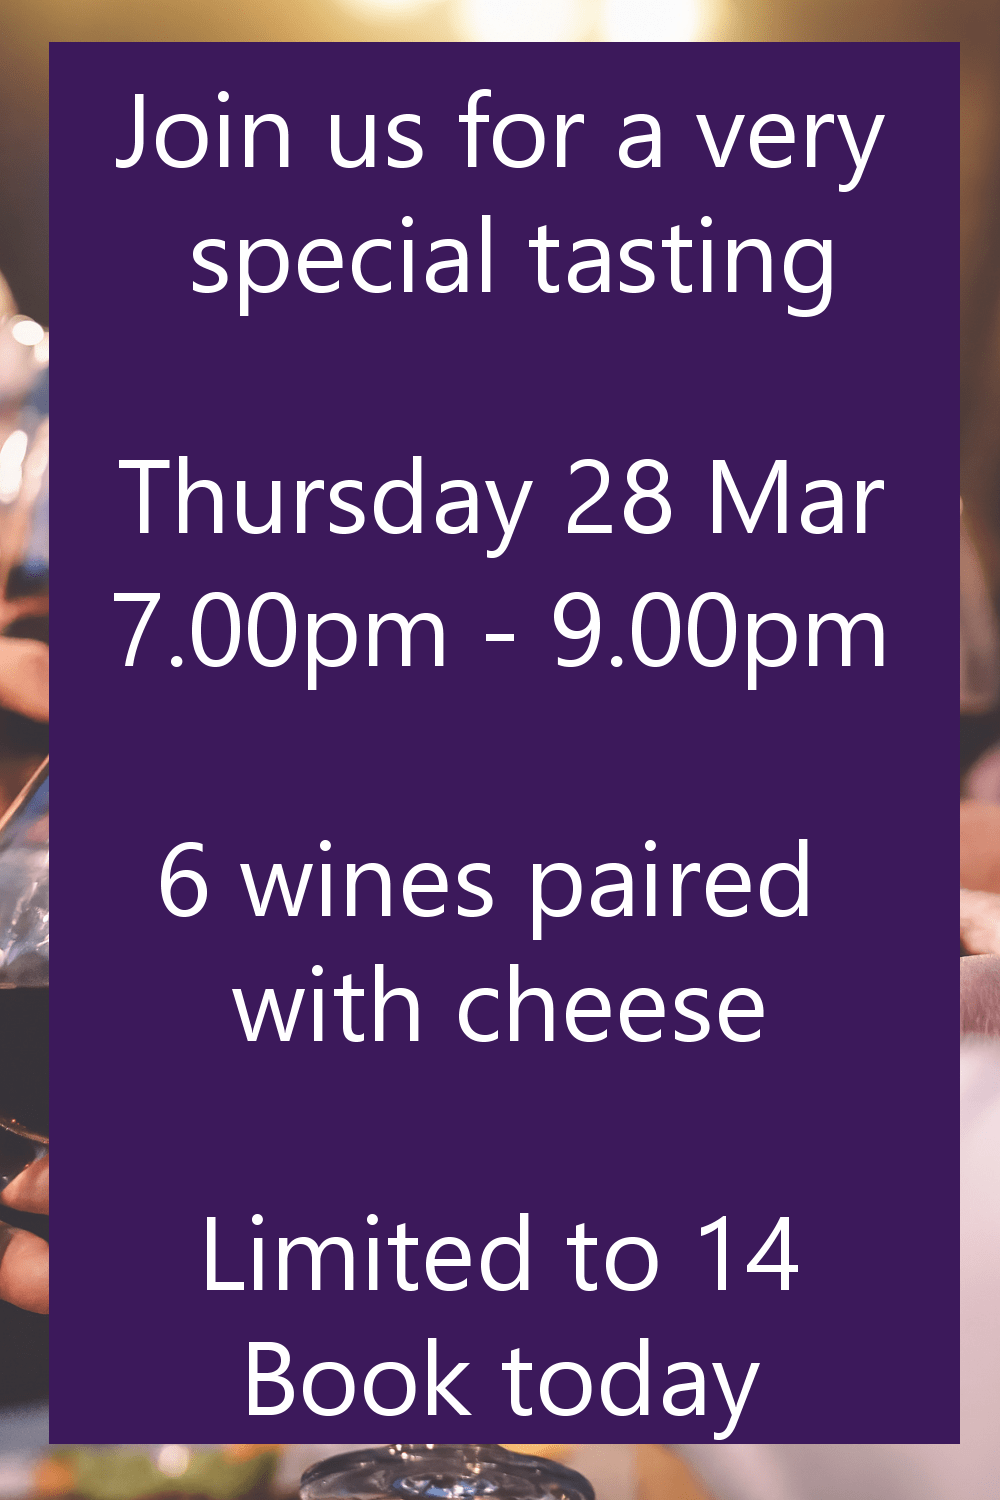 Novel Wines Event Wine & Cheese Tasting at the Novel Wines Bar in Bath, on Thursday 28 March at 7PM